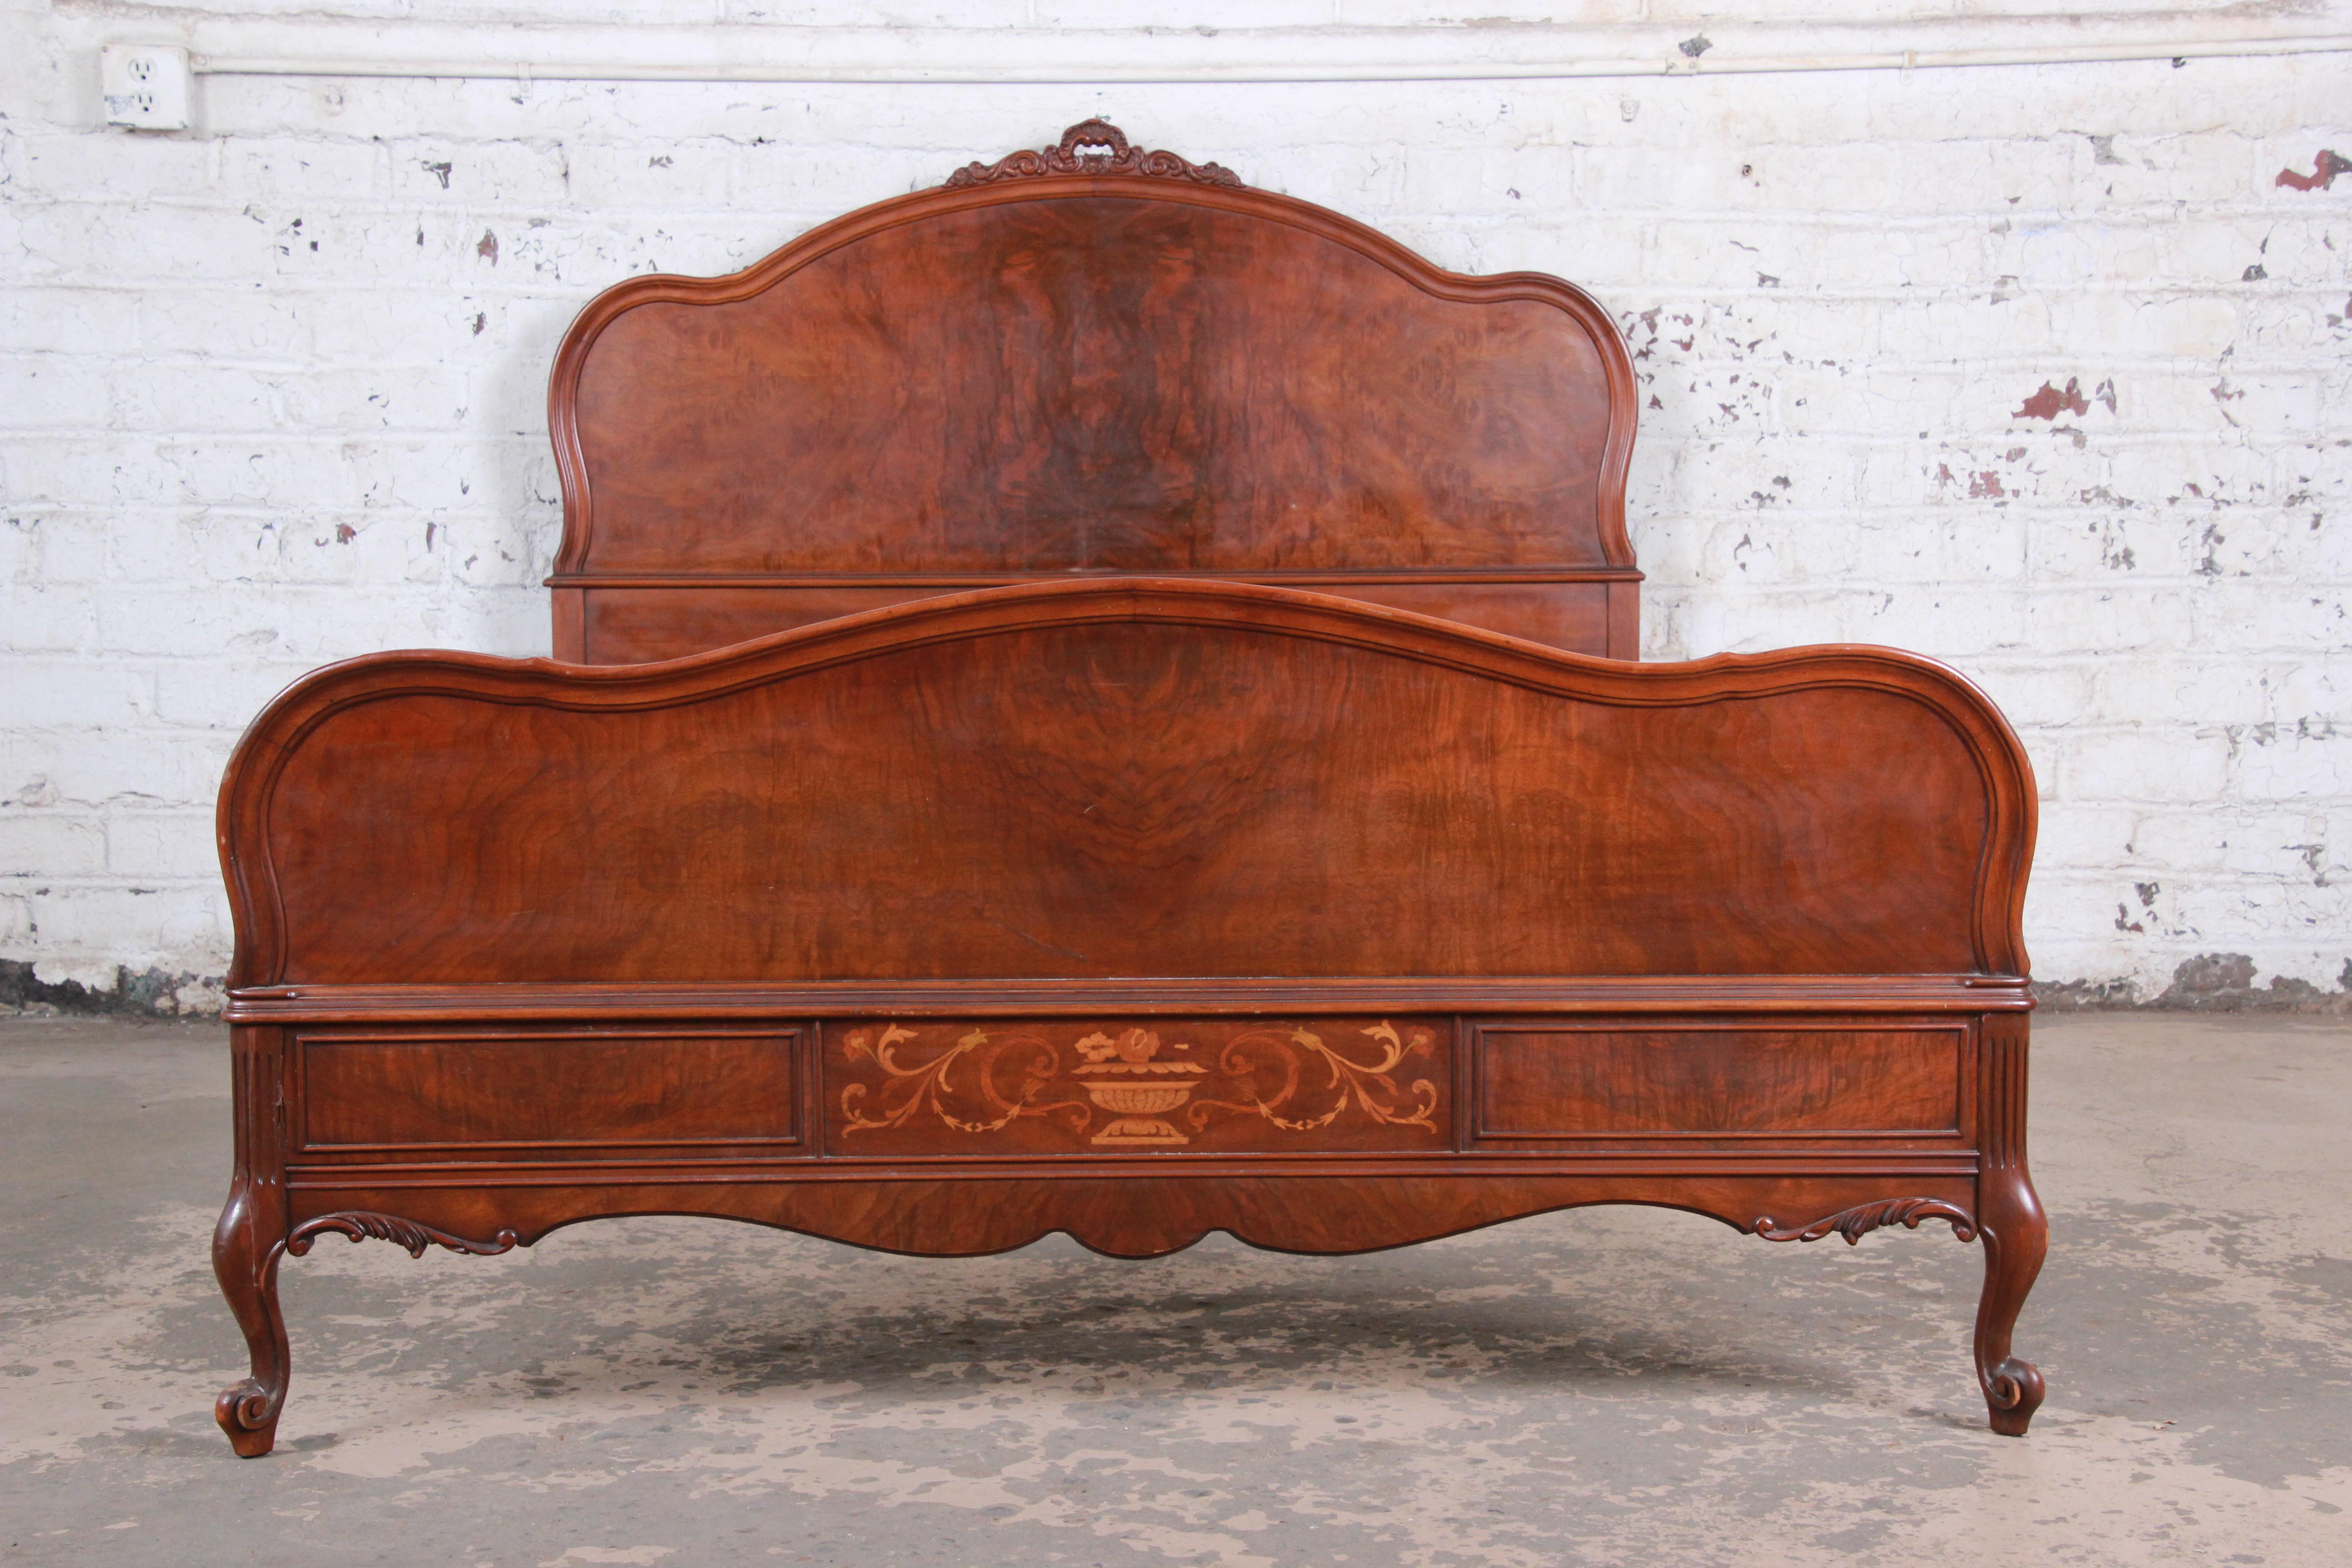 A gorgeous French provincial Louis XV style full size bed frame from 